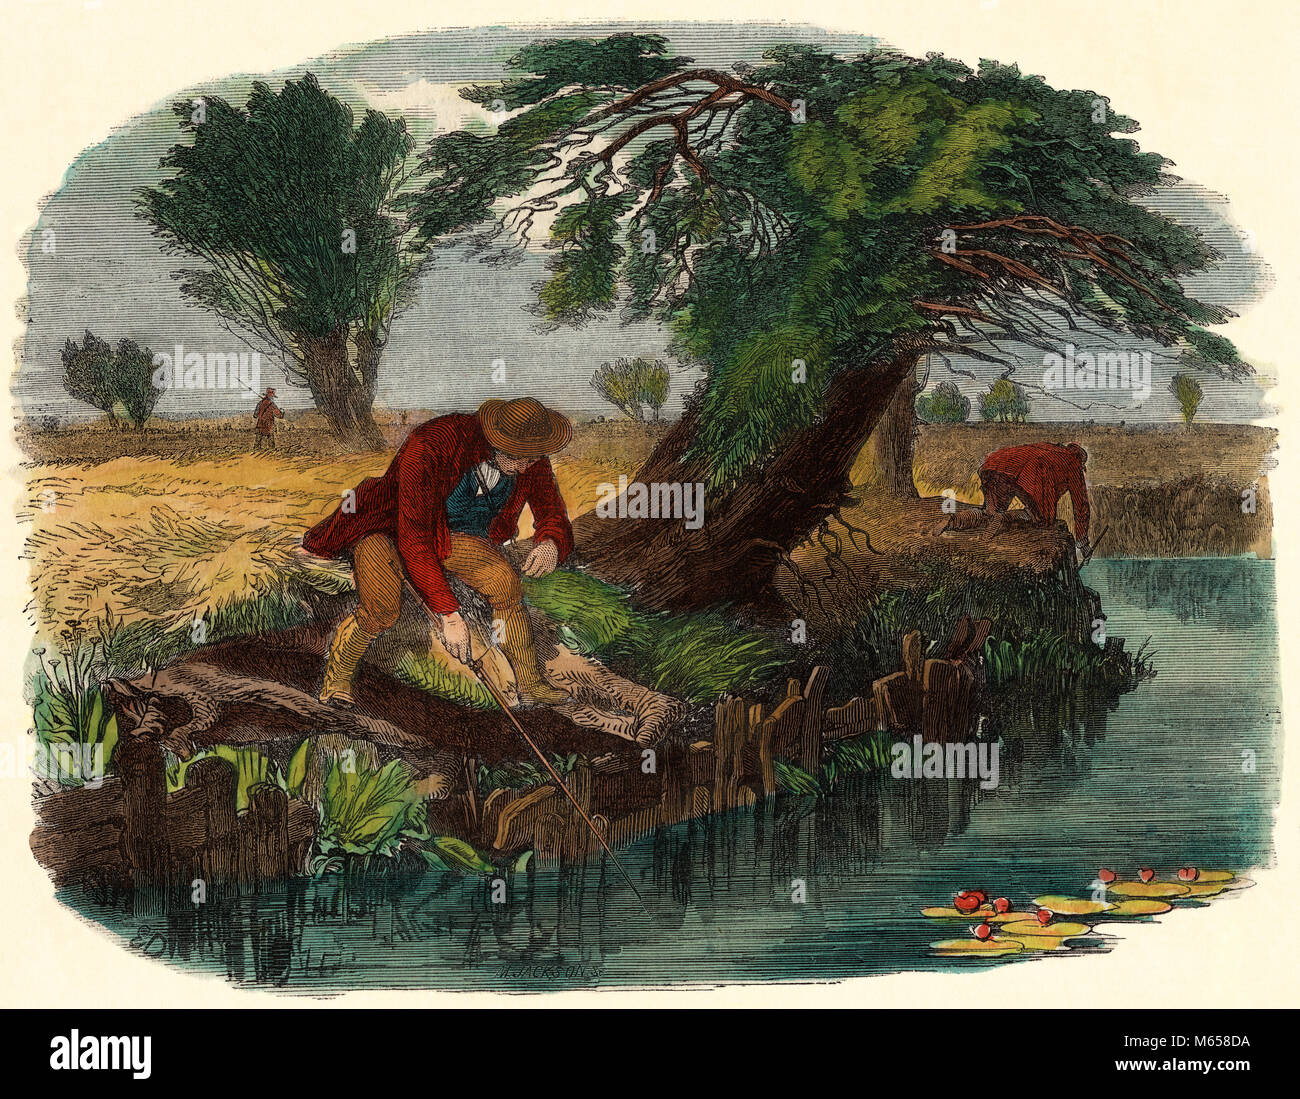 1800s 19TH CENTURY DRAWING OF MEN SNIGGLING FOR EELS IN RIVER FISHING WITH WORM ON A STICK - ka9183 CPC001 HARS 40-45 YEARS HISTORIC ADVENTURE RECREATION WORM ANGLING MALES MID-ADULT MID-ADULT MAN RIVERBANK BAIT CAUCASIAN ETHNICITY CREEK EARTHWORM EEL EELS FISH HOOK OLD FASHIONED PERSONS SNIGGLE SNIGGLING SNIGS Stock Photo